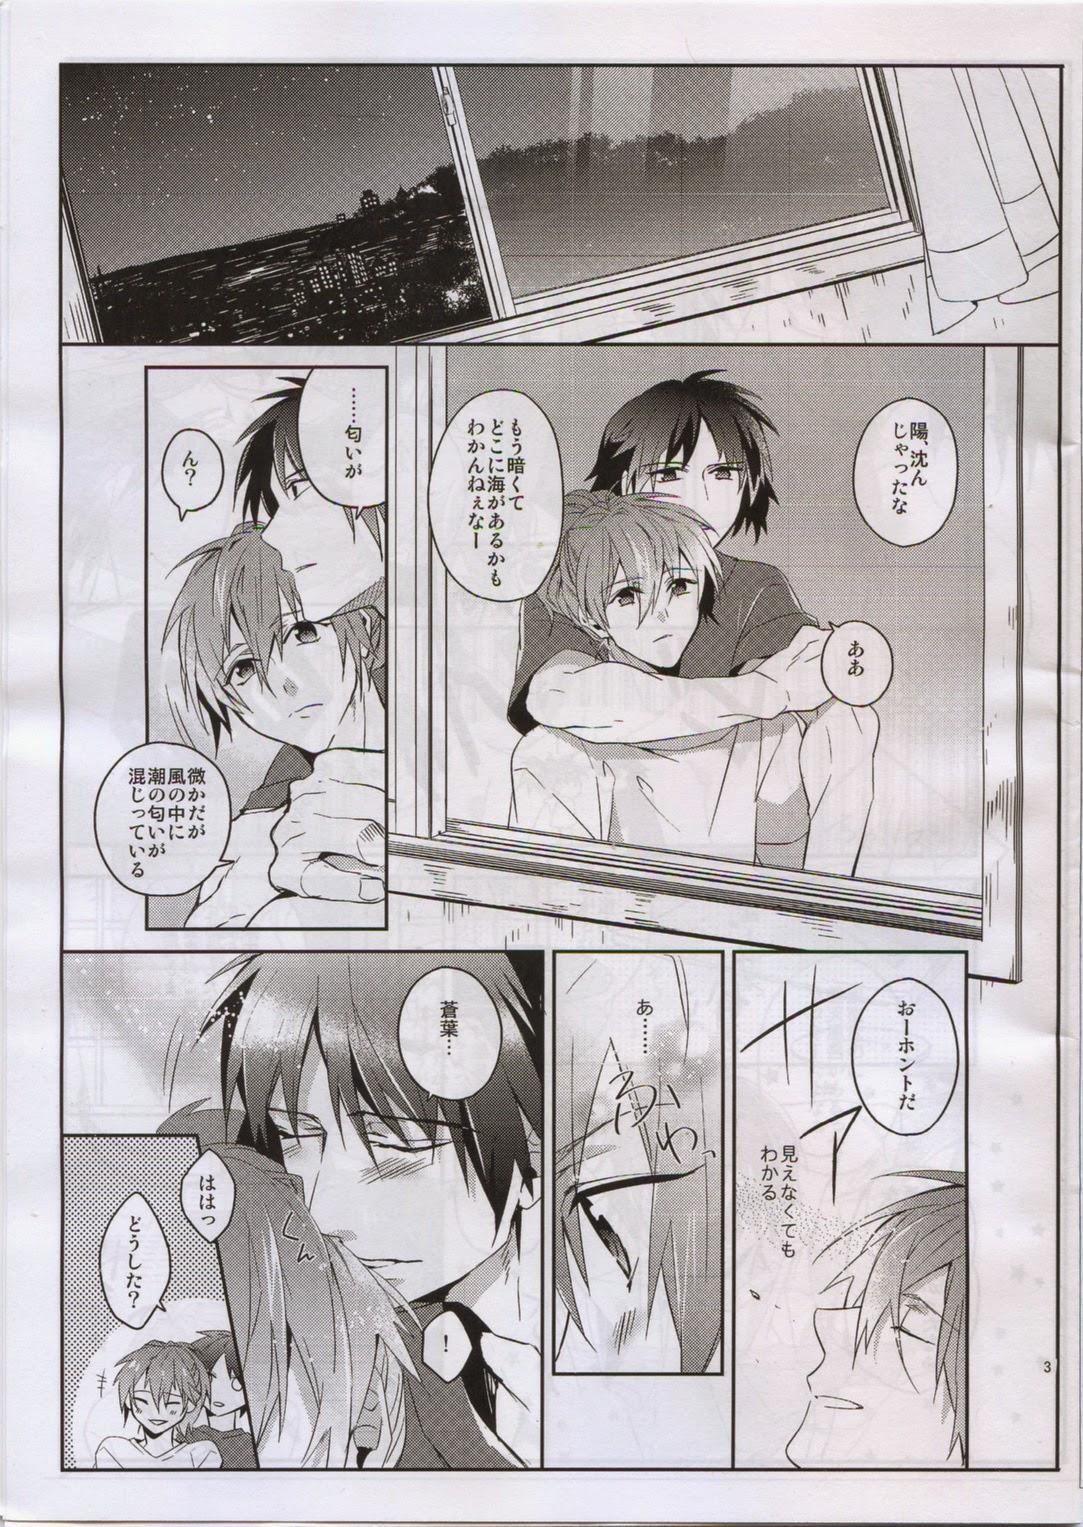 Ikillitts After Summer Time - Dramatical murder Sapphic Erotica - Page 4